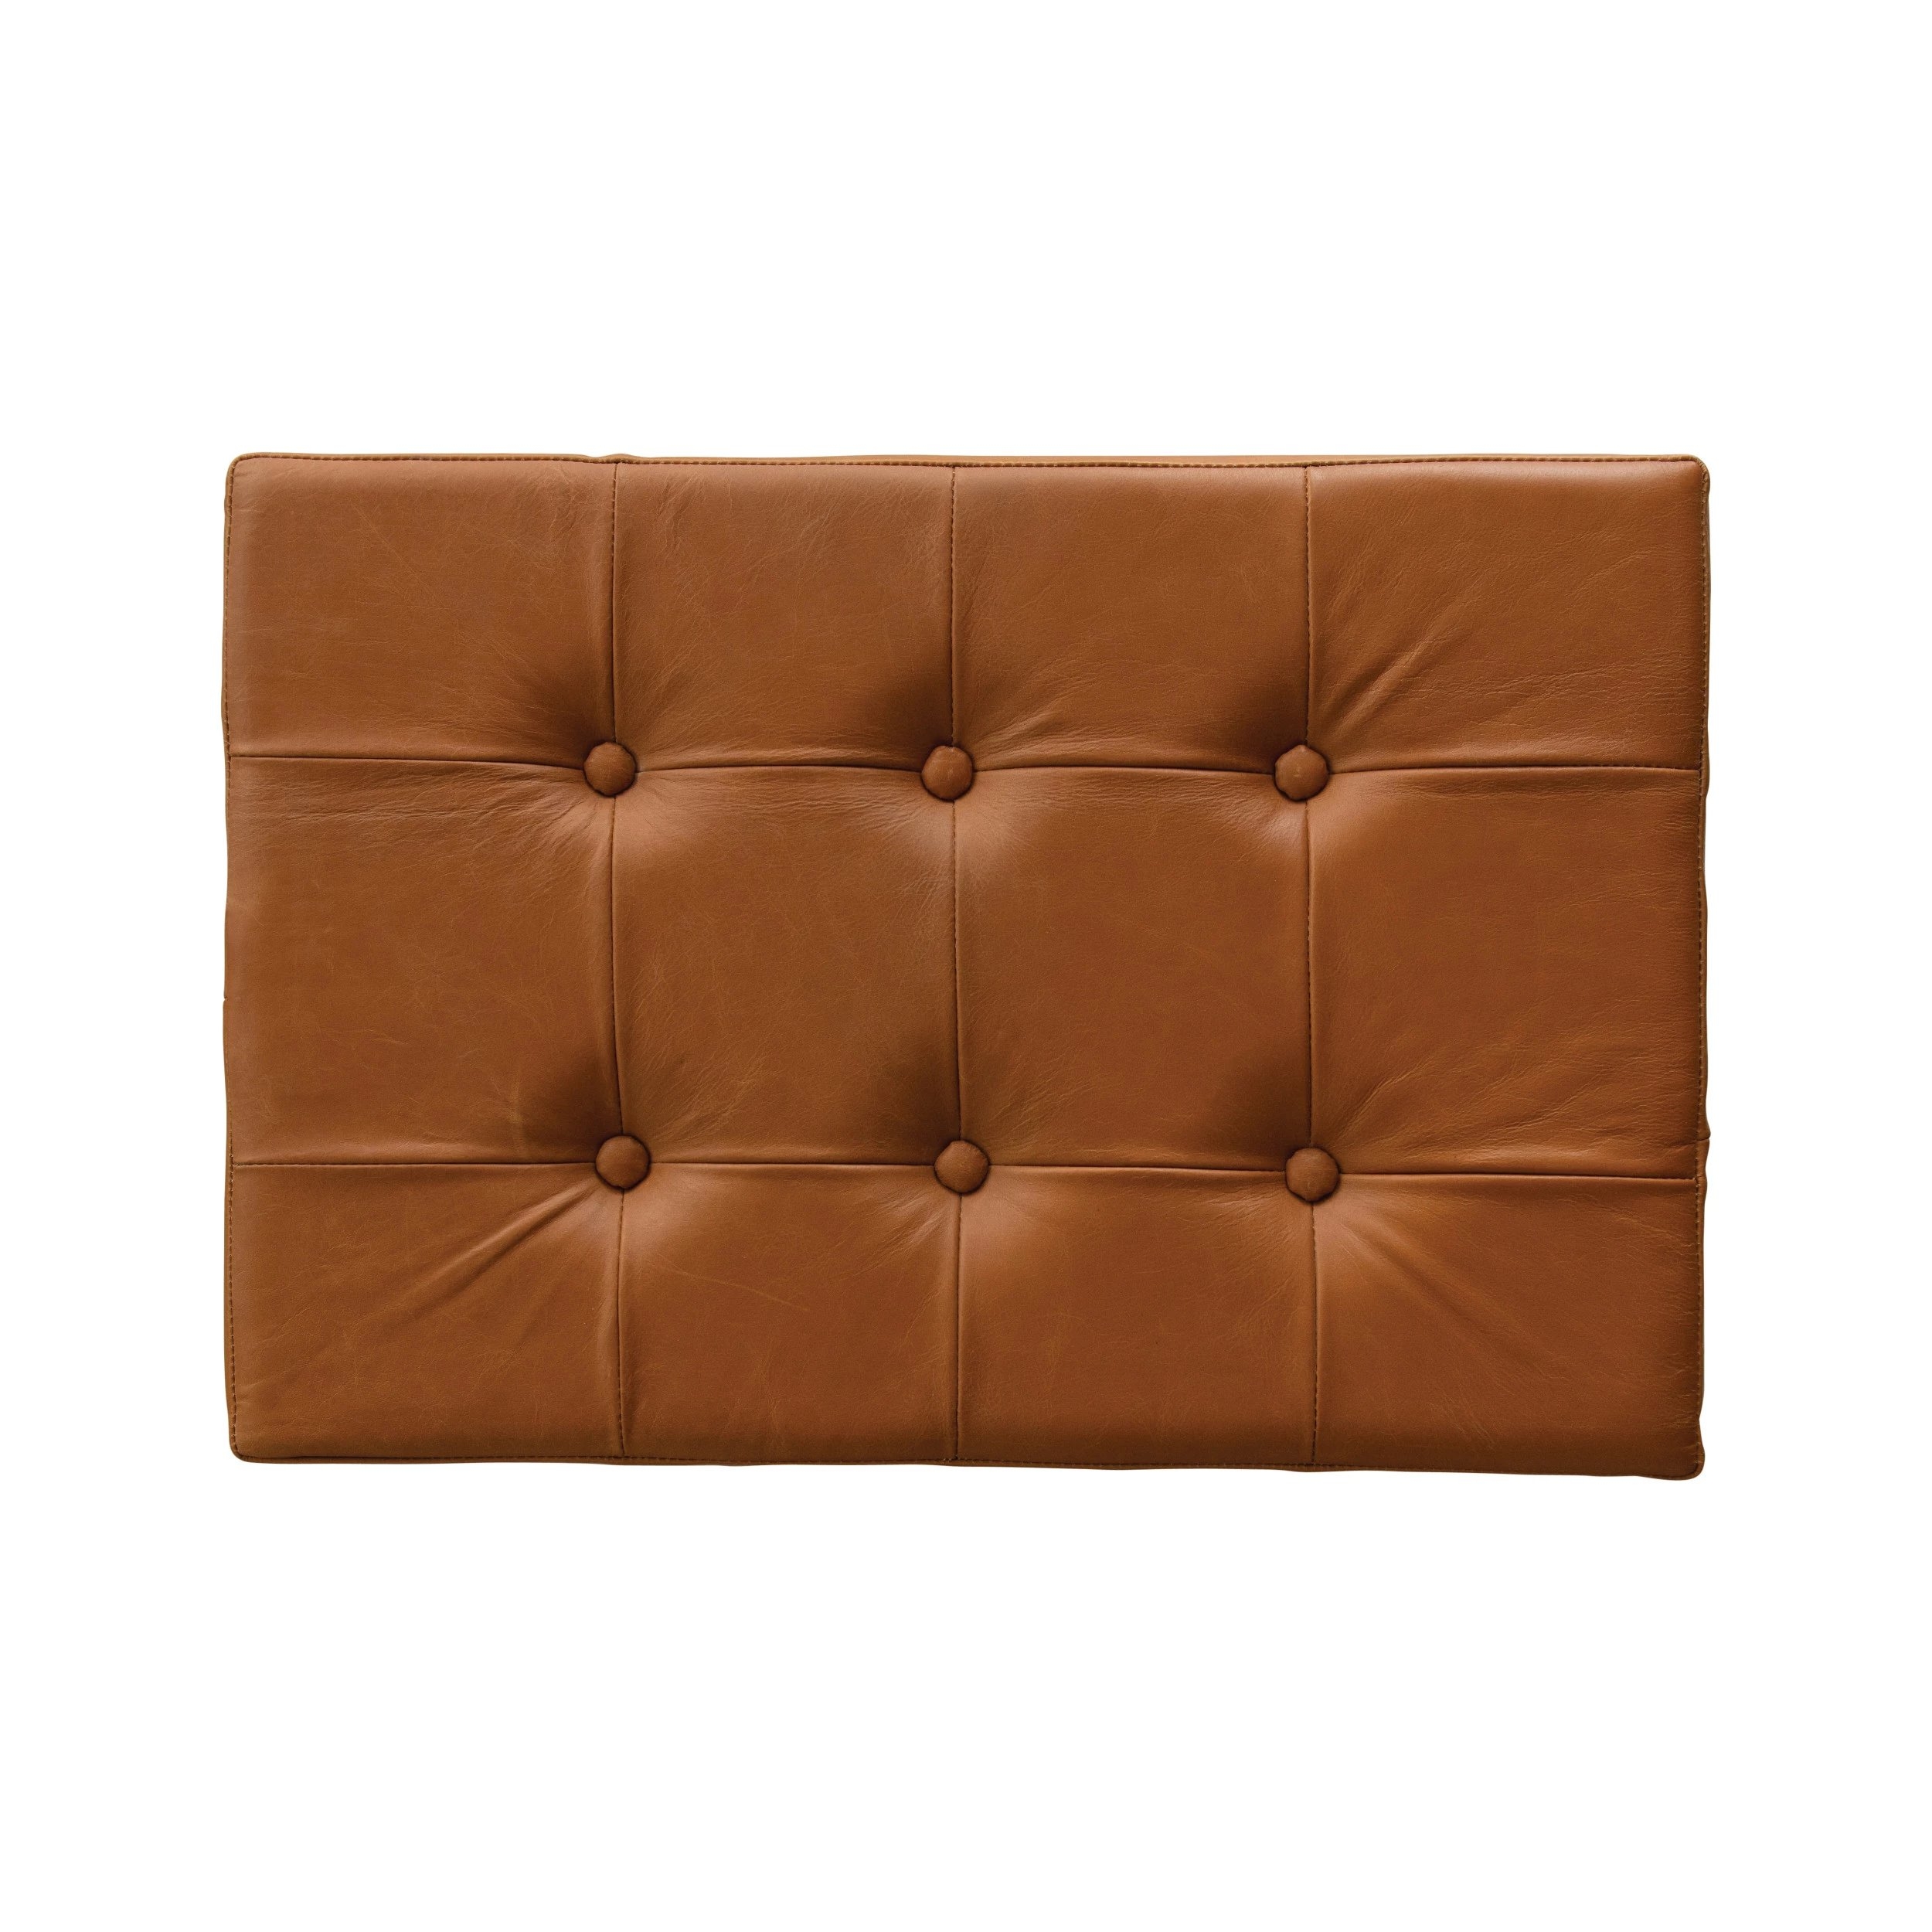 Tufted Leather Stool with Metal Legs - Image 3